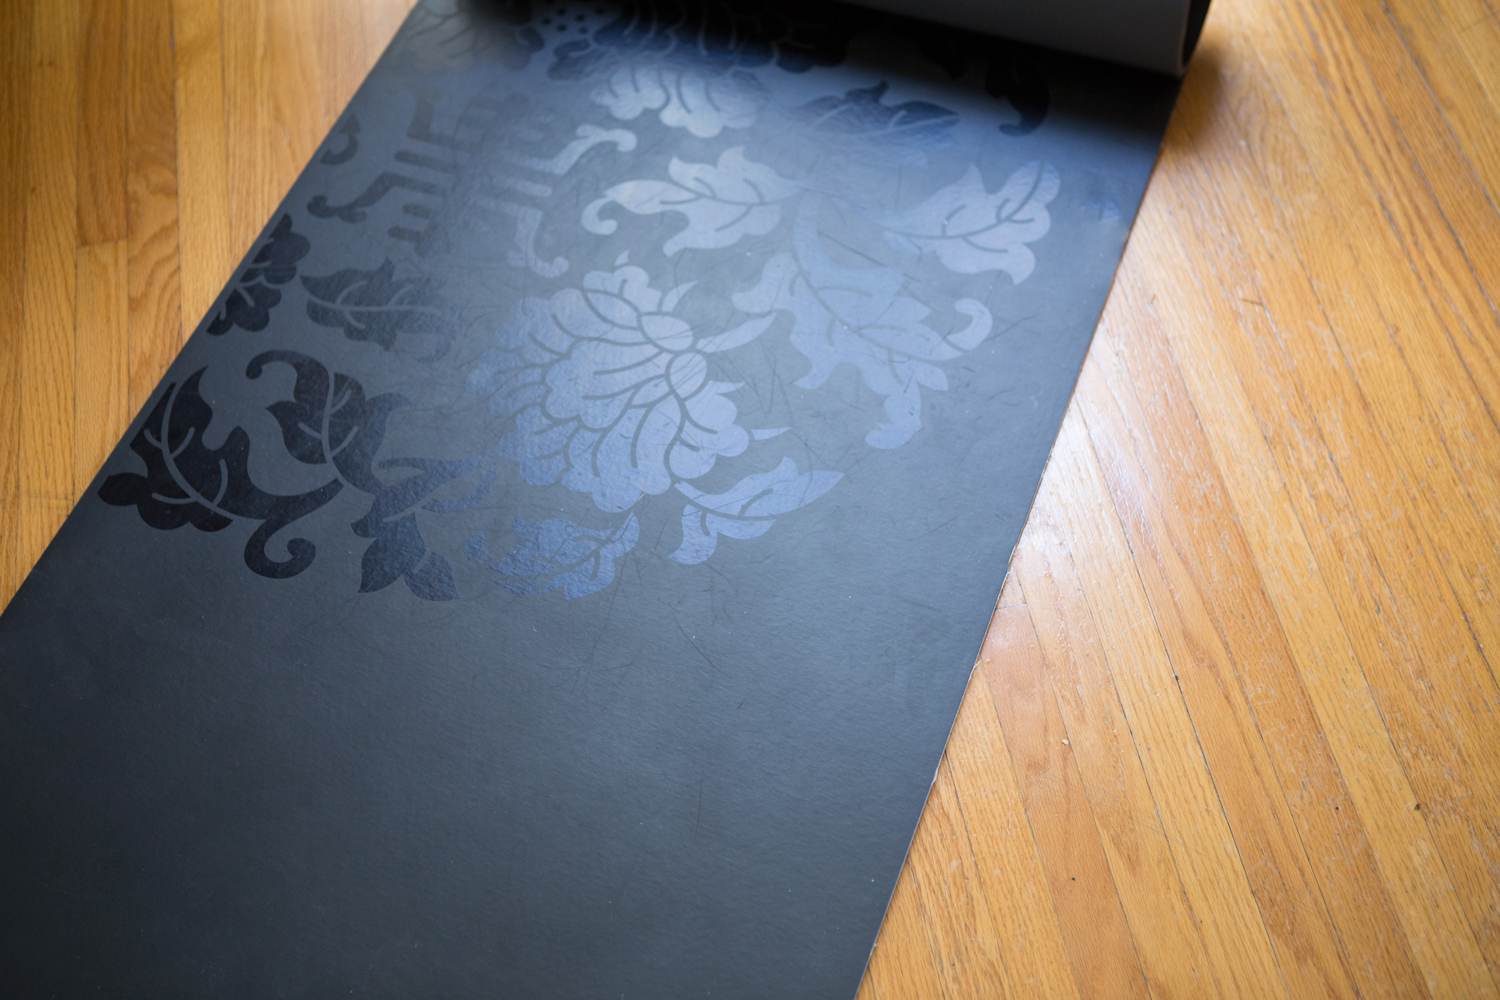 Heart Pumping Yoga Sequence, Plus a Gaiam Giveaway! — YOGABYCANDACE